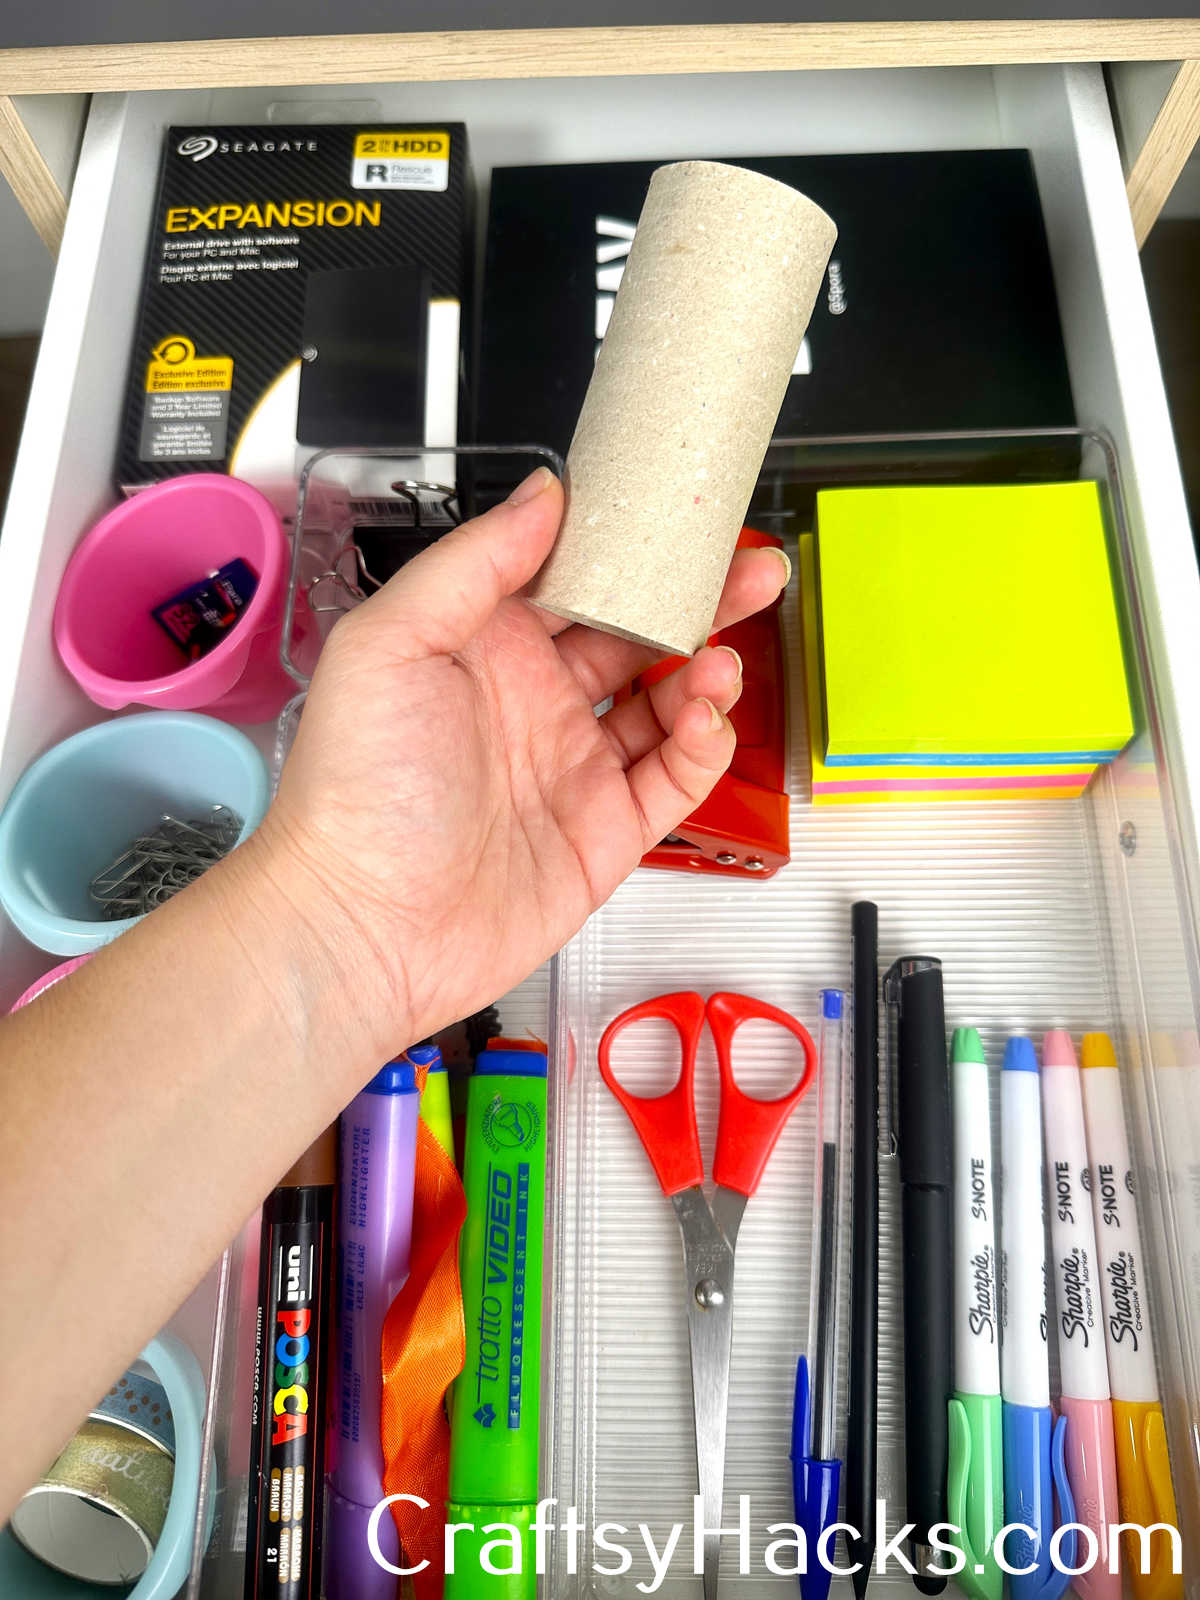 Use a Toilet Paper Roll to Keep Stationary in Place